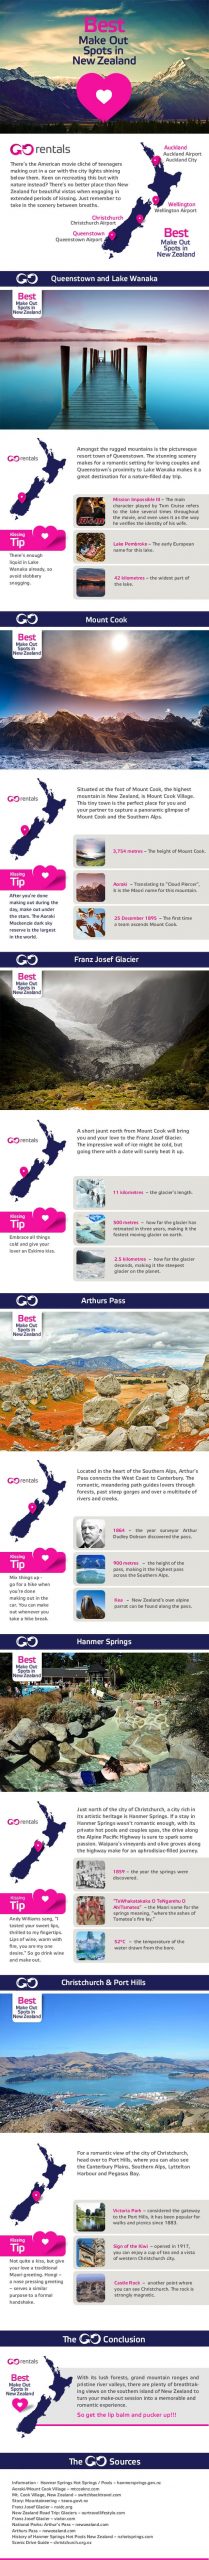 Best Make Out Spots in New Zealand infographic